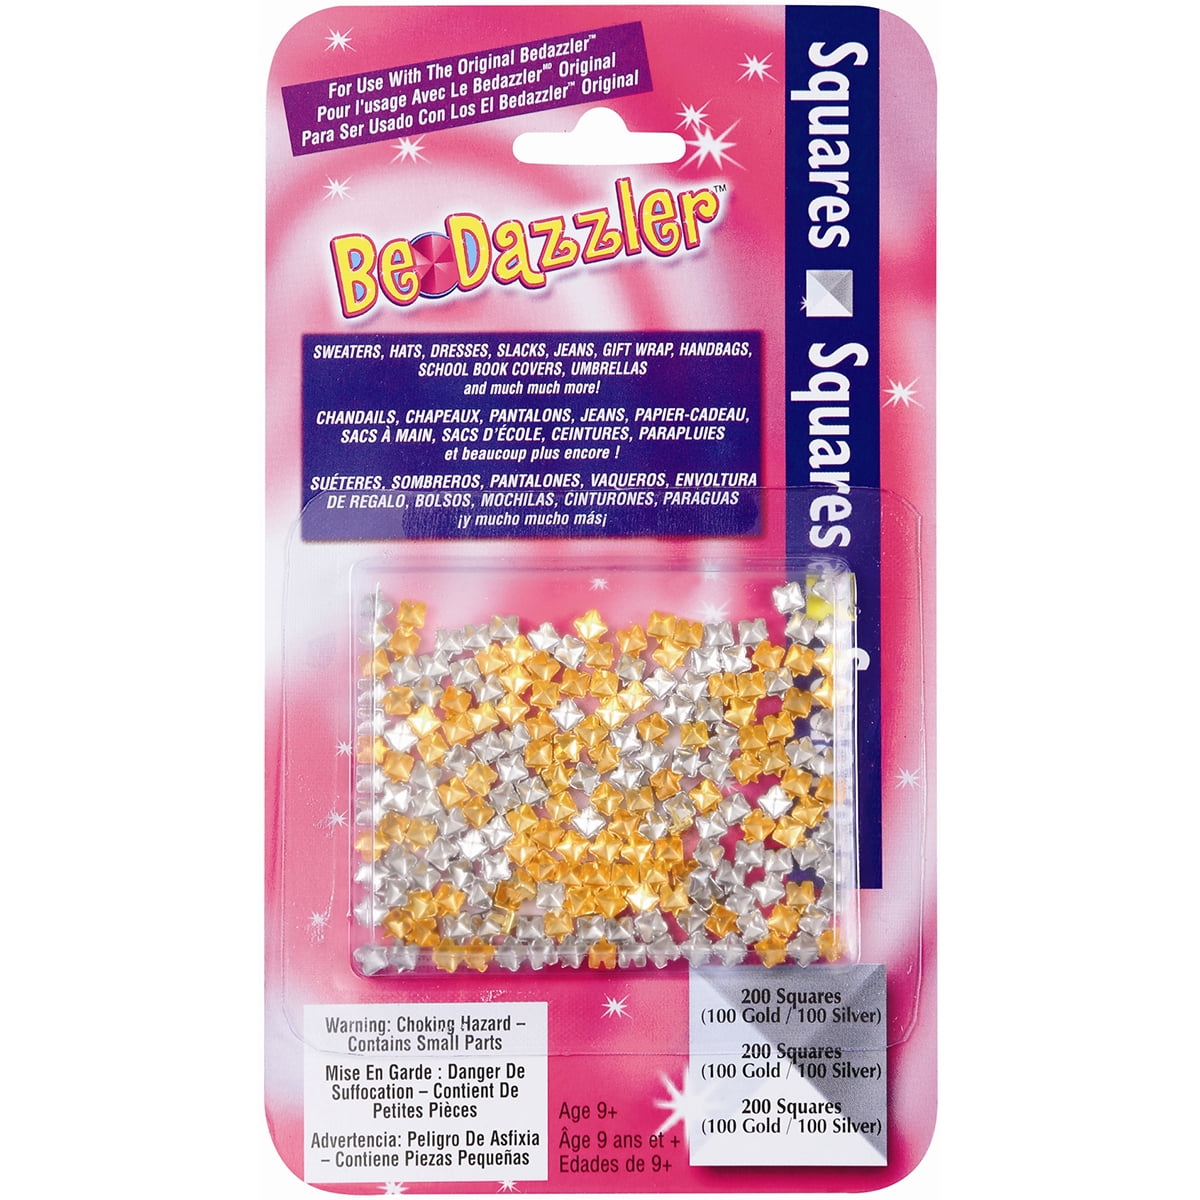 Bedazzler Stud Refill Pack 200 pc Gold & Silver Squares 